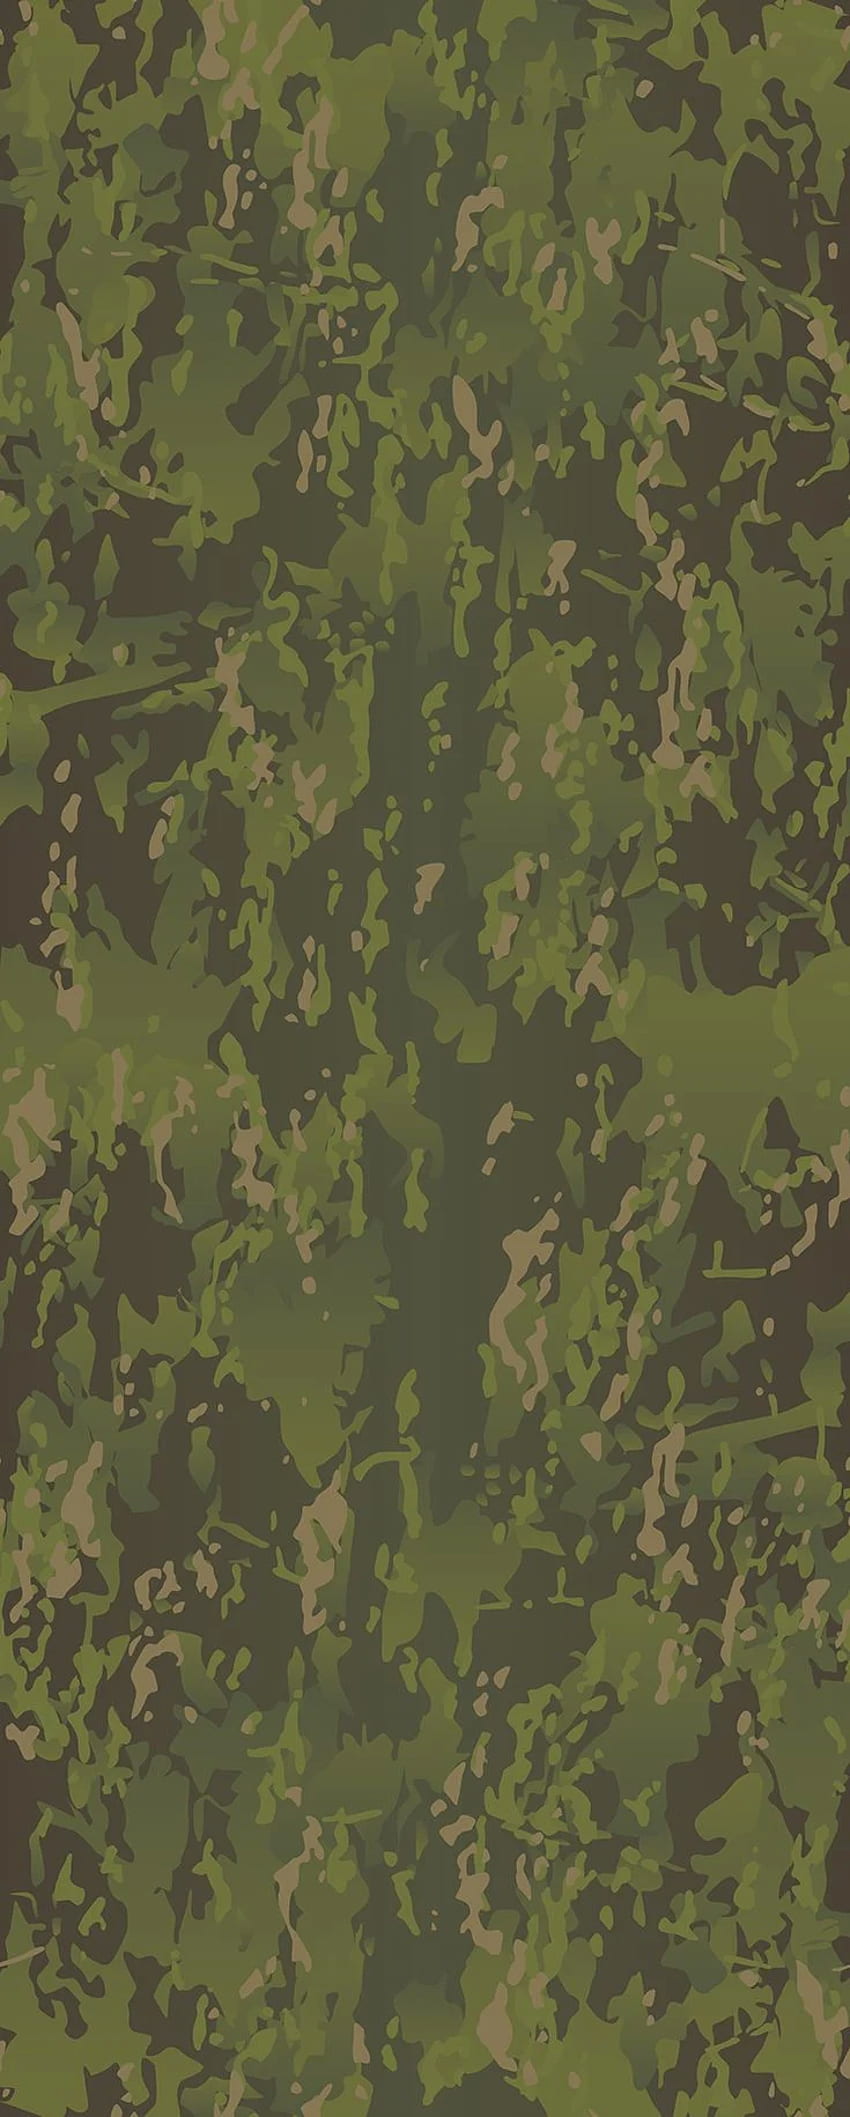 3840x2160px, 4K Free download | OCP Black vector camouflage pattern for ...